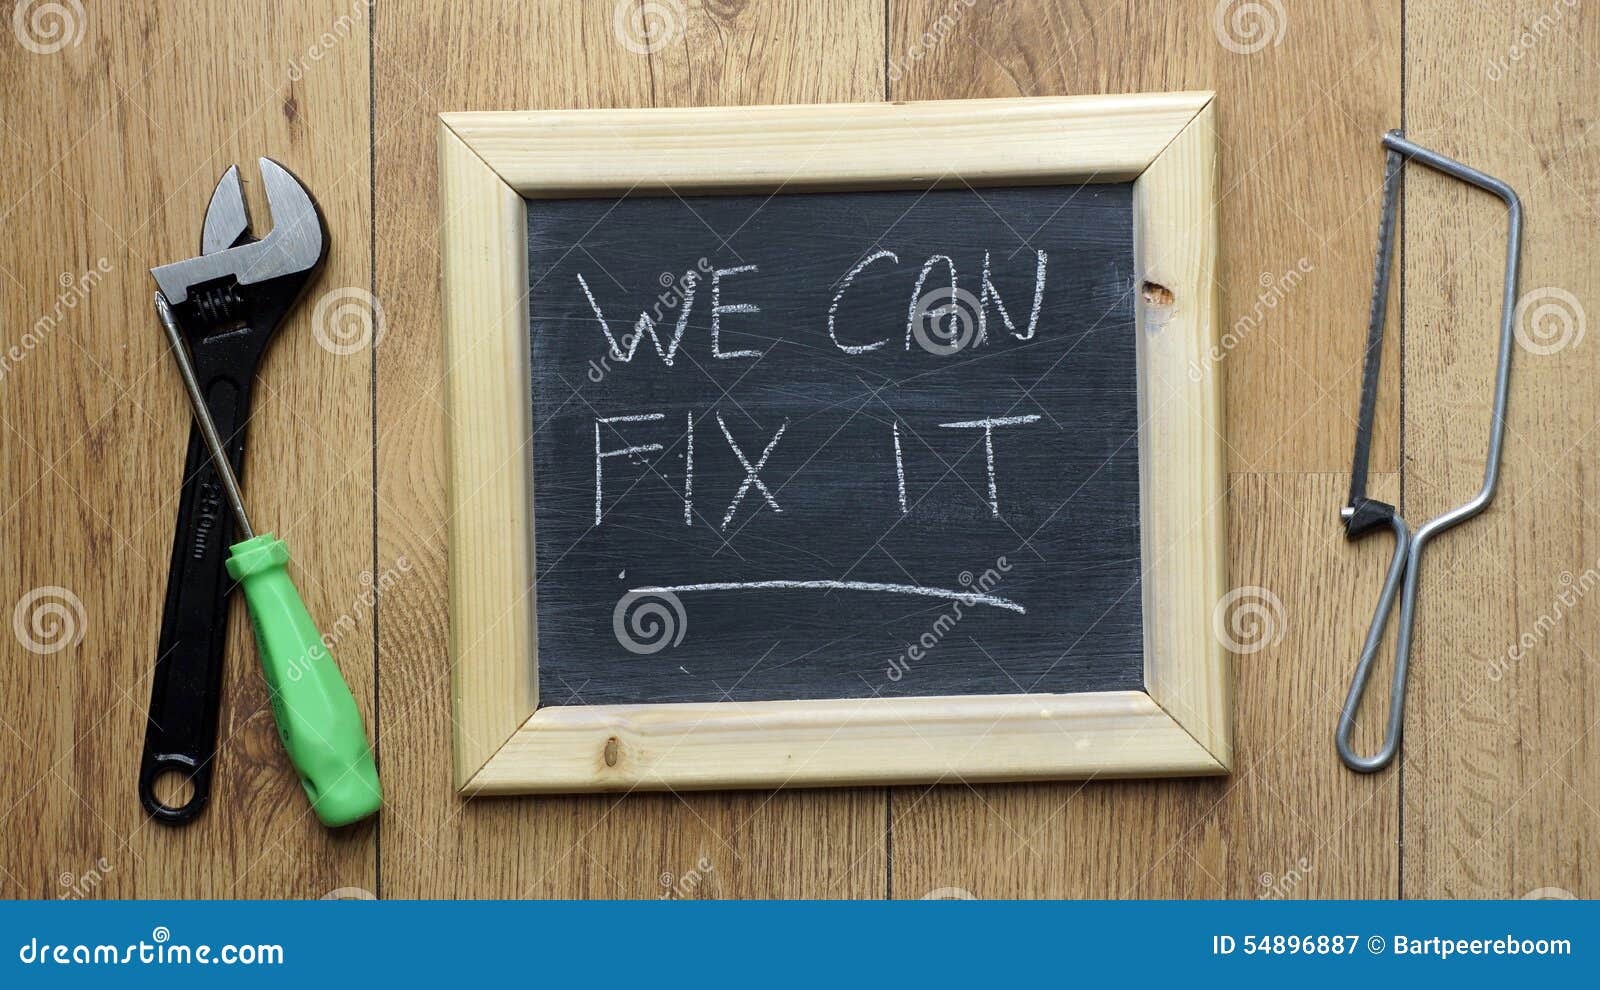 we can fix it